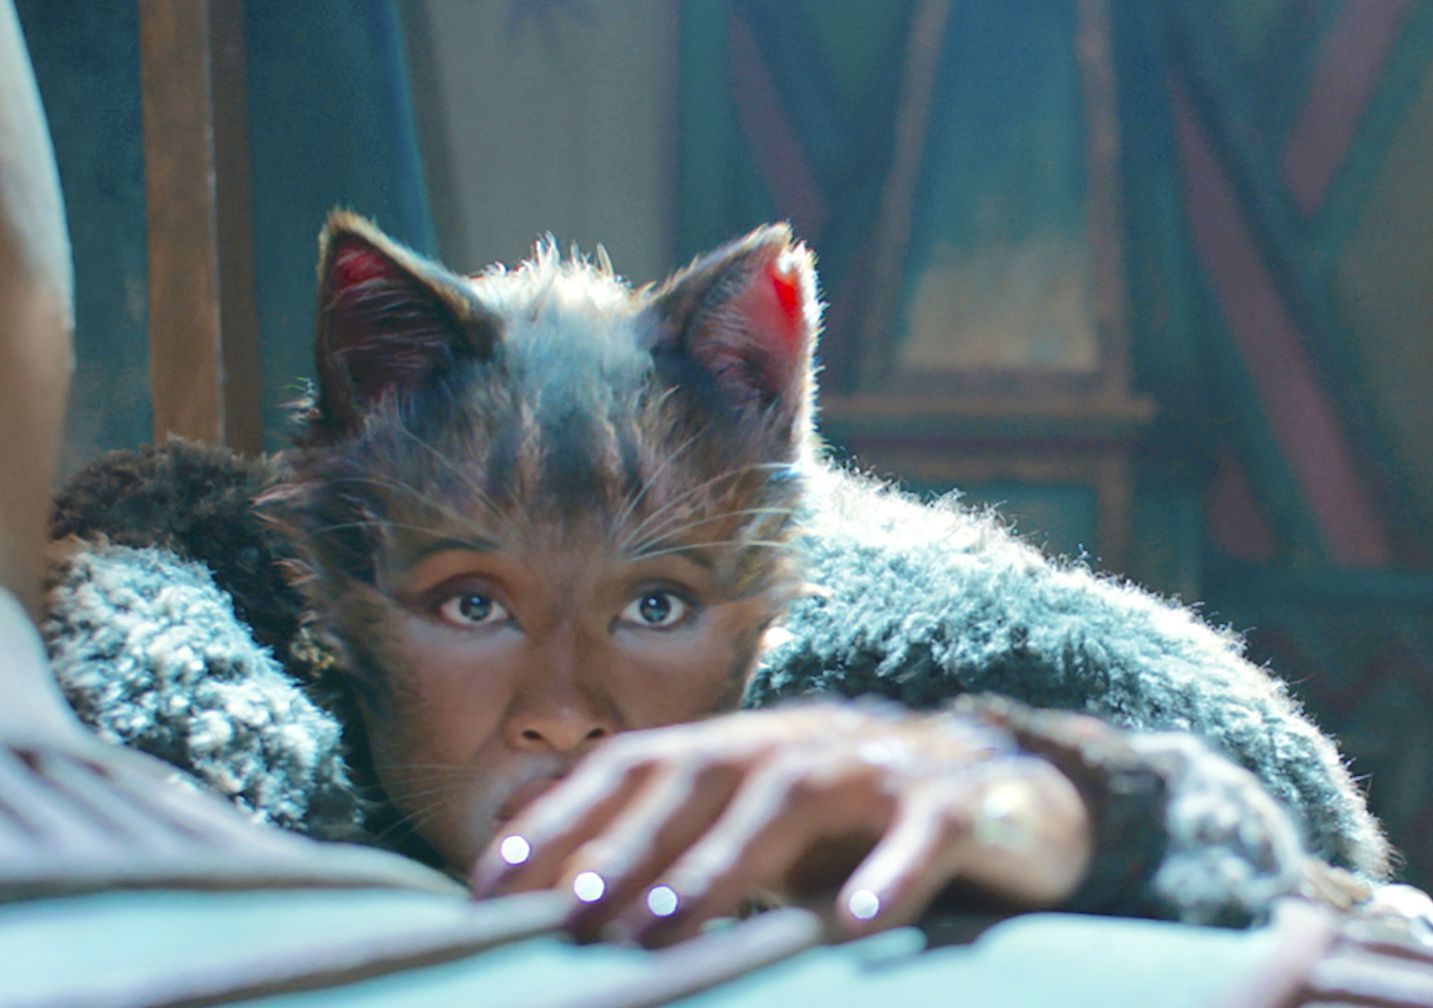 Movie Review: 'Cats,' Starring Taylor Swift and Judi Dench